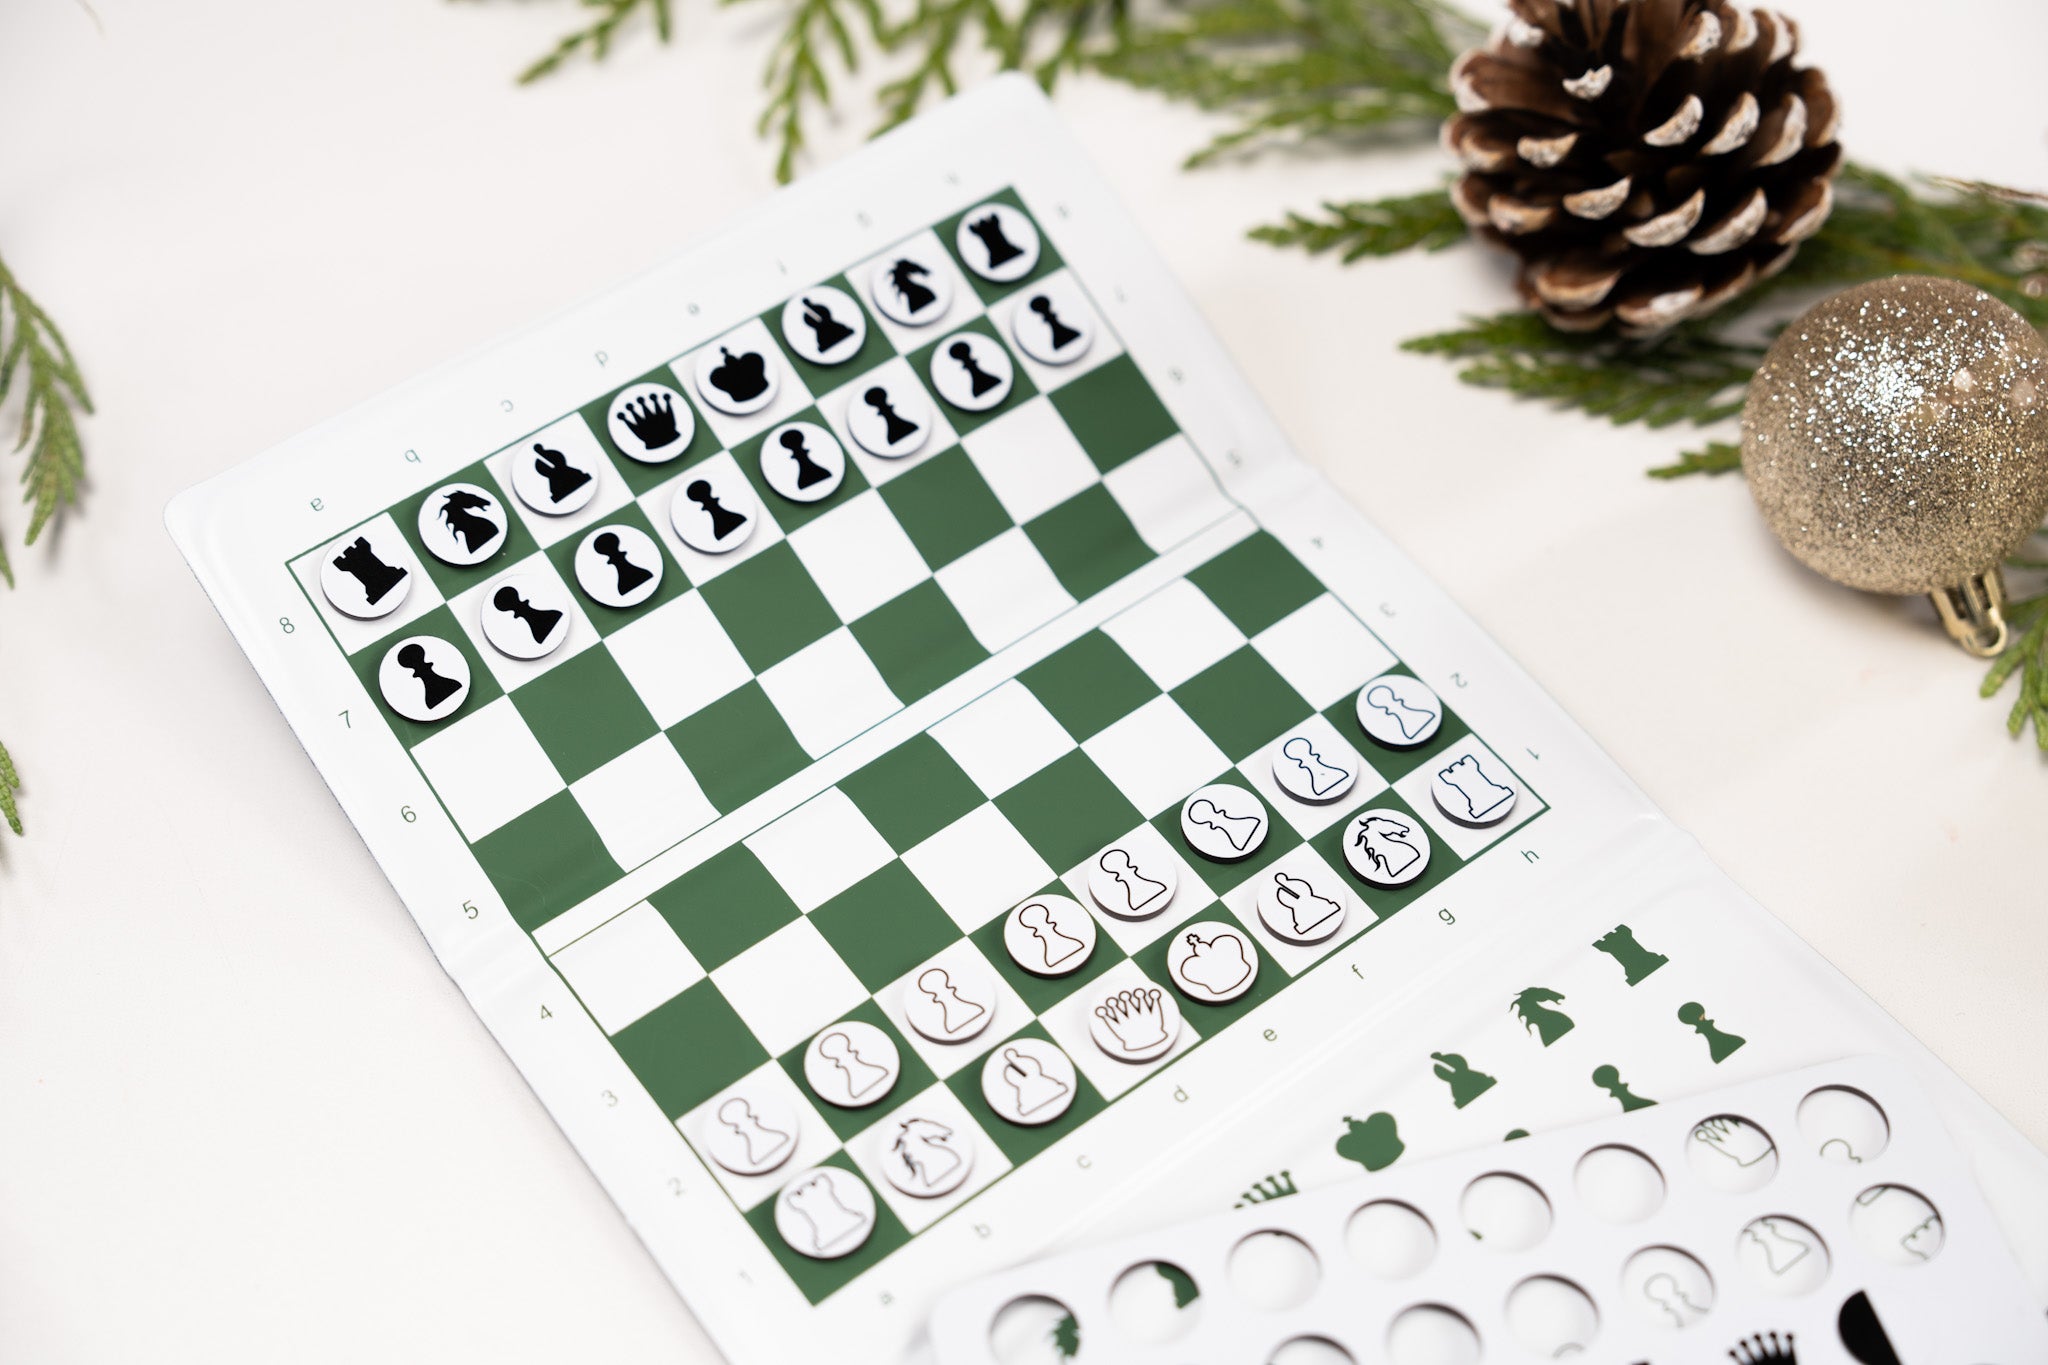 Any Black Friday deals for chess lovers? : r/chess